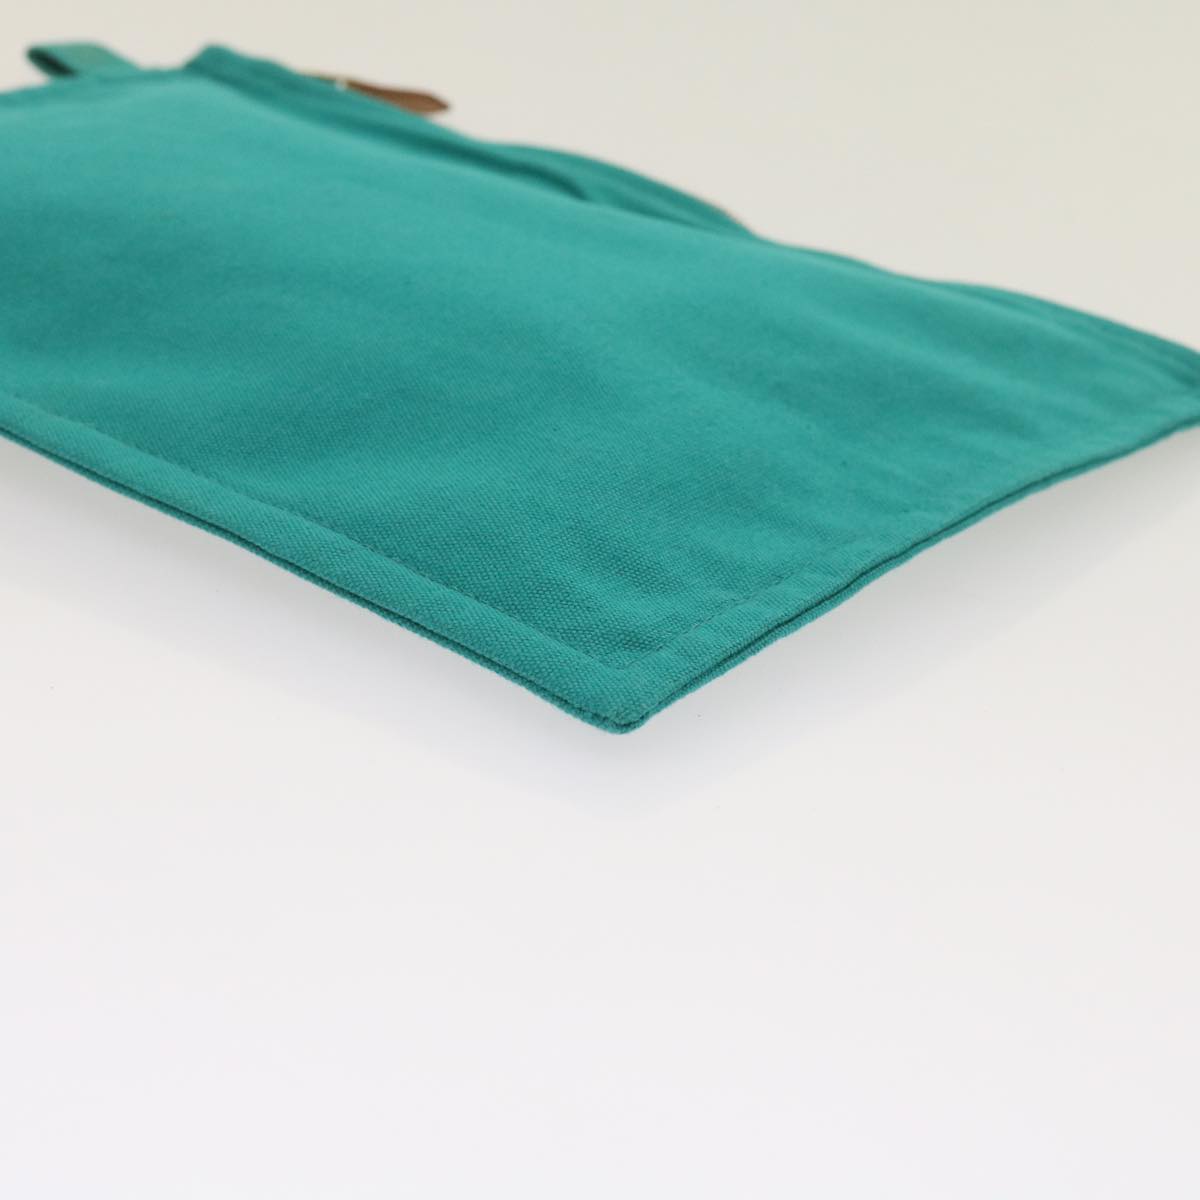 HERMES Pouch Canvas Turquoise Blue Auth ep3072